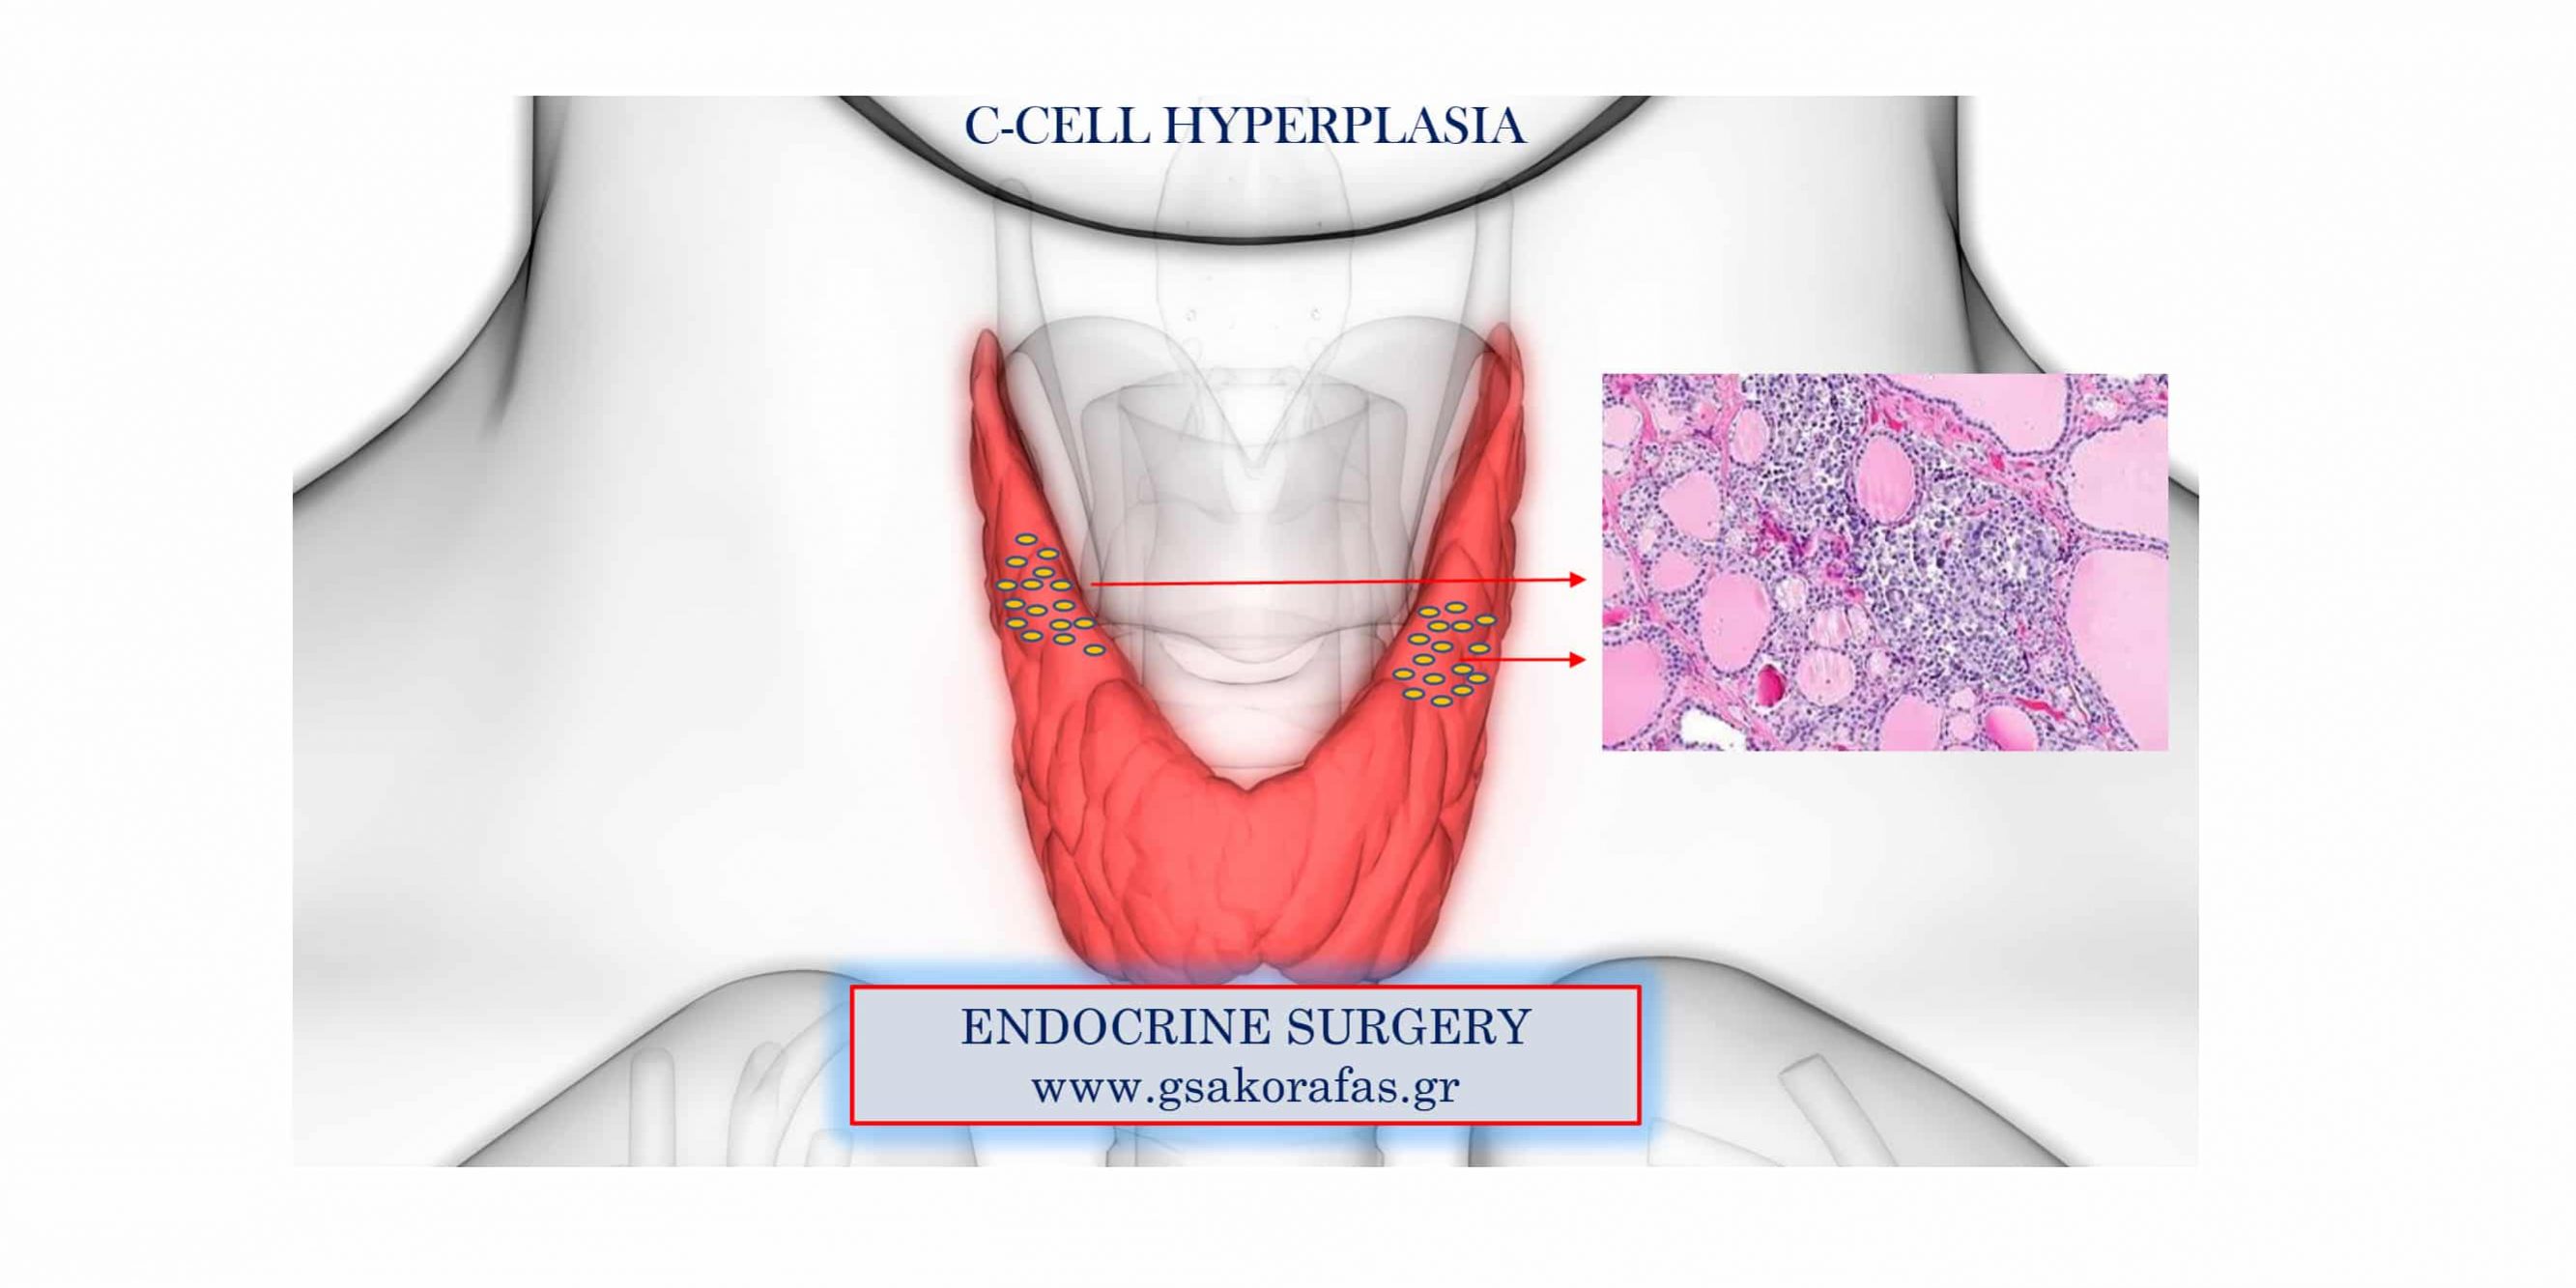 C-cell hyperplasia as an incidental finding following thyroidectomy - practical significance